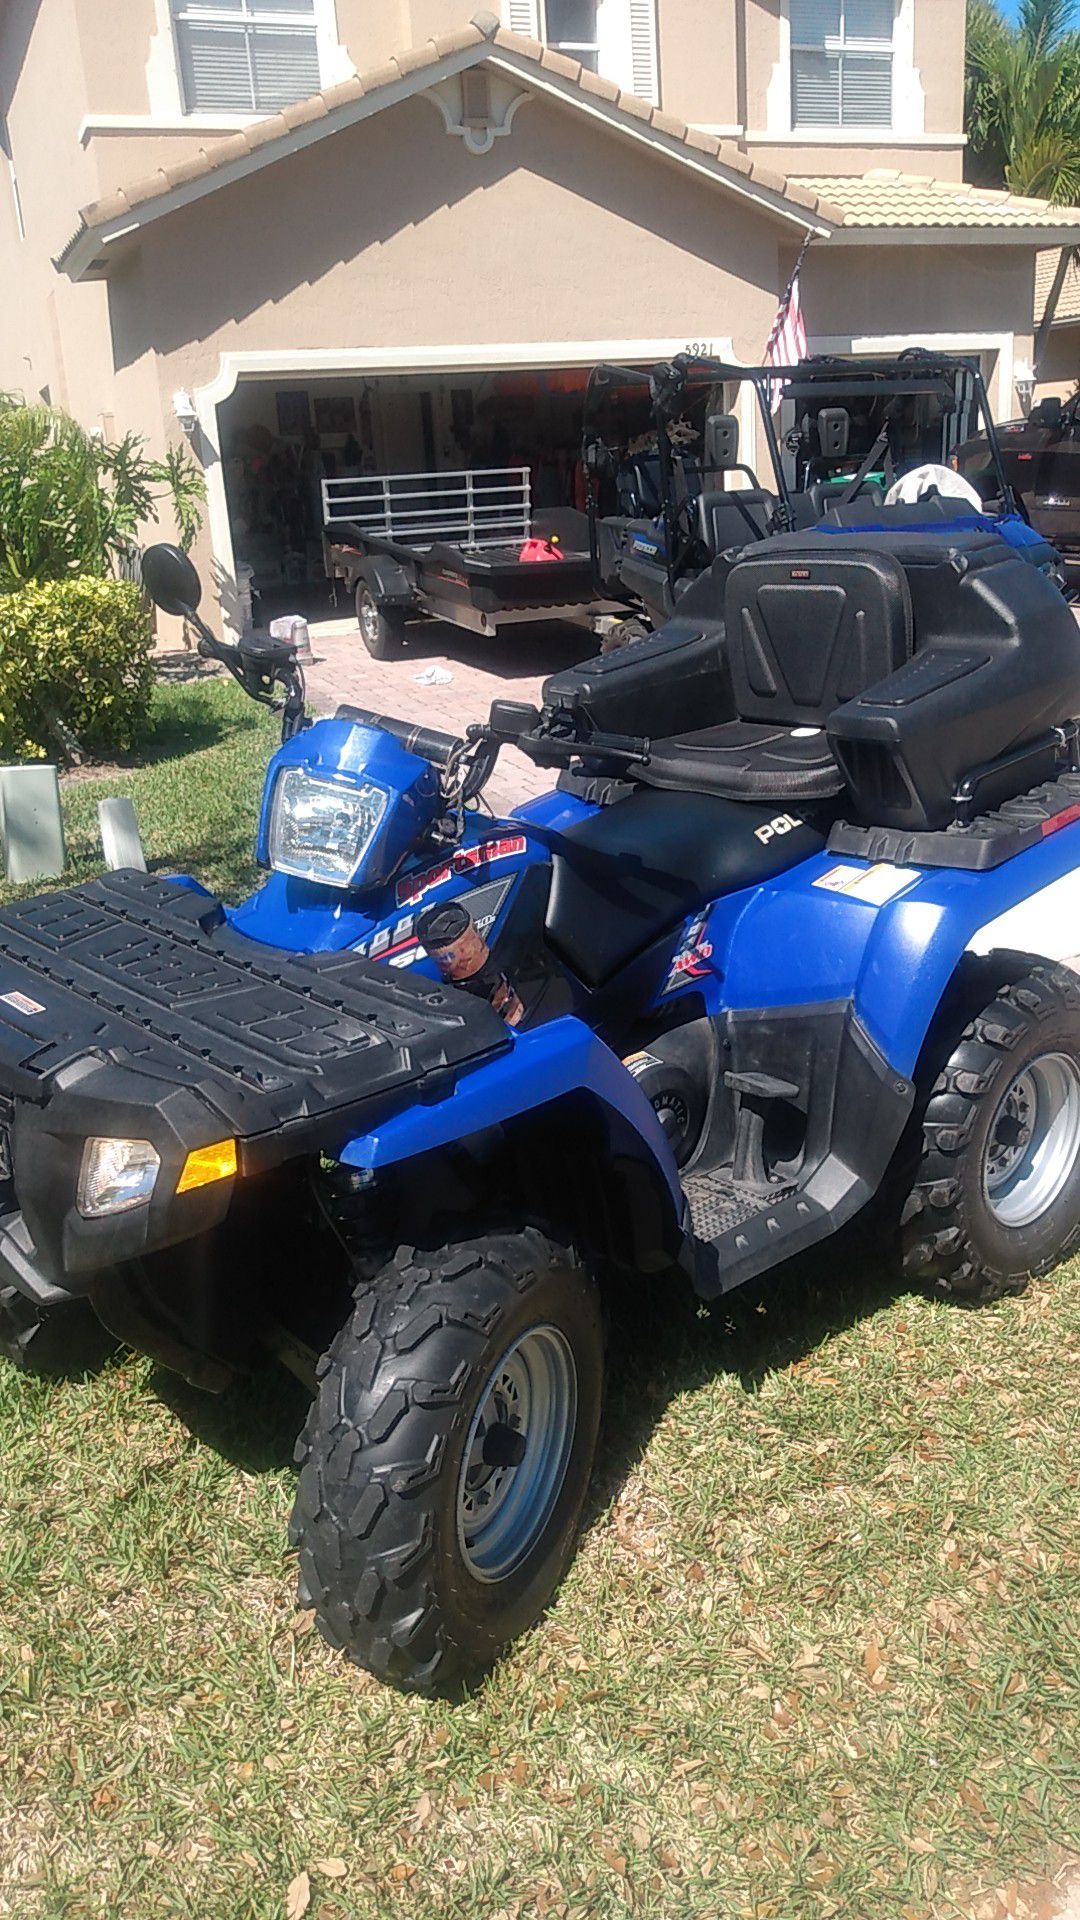 Polaris Sportsman 500HQ Anniversary Edition. Only 48 hours on it. Always cleaned after every ride.